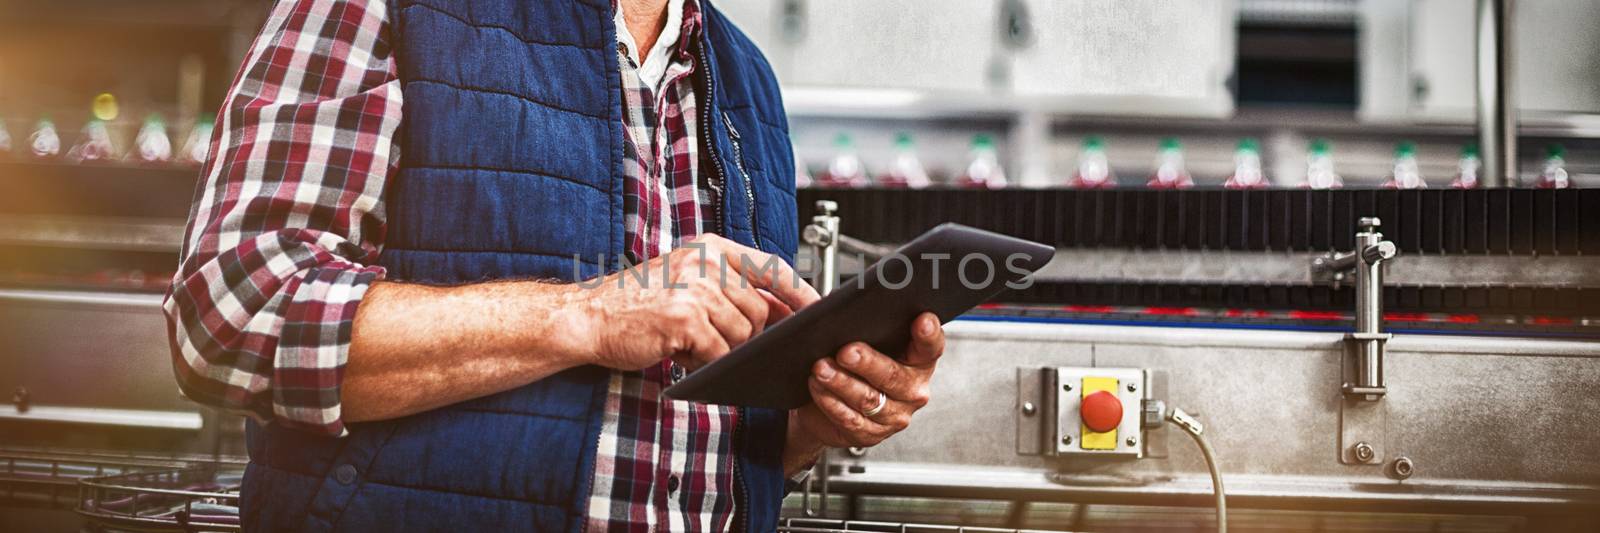 Portrait of smiling factory worker using digital tablet in the factory